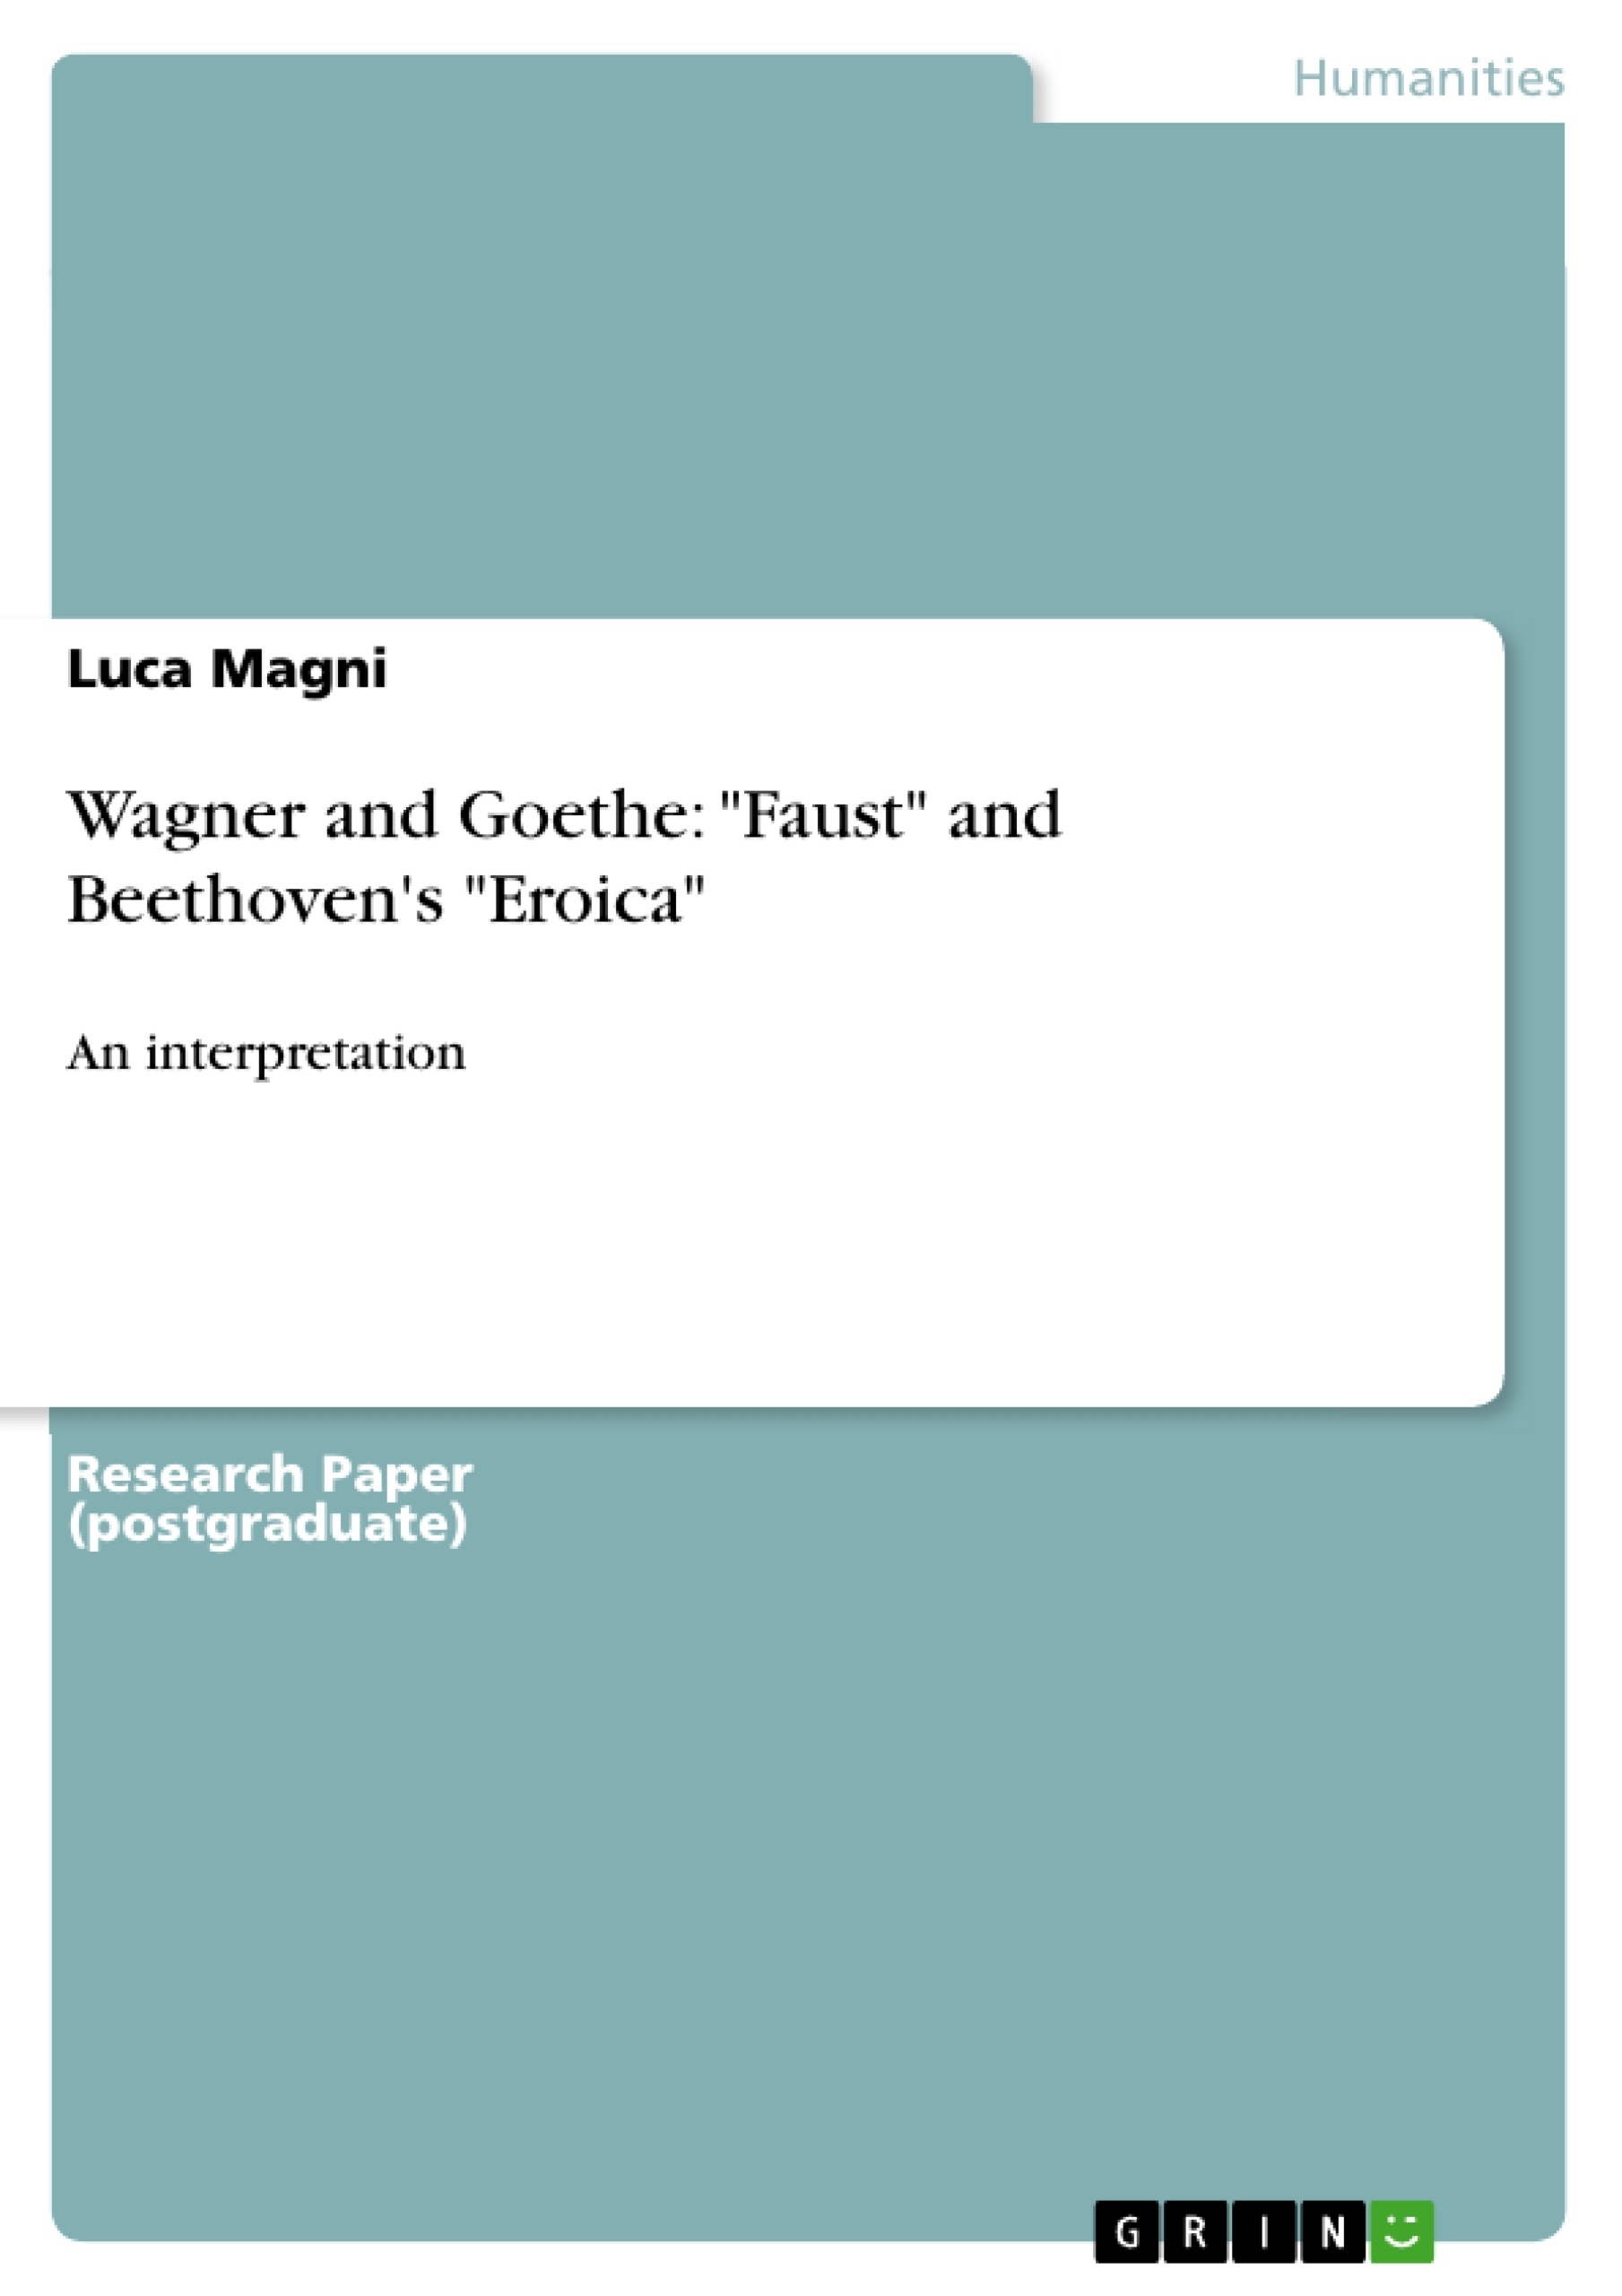 Title: Wagner and Goethe: "Faust" and Beethoven's "Eroica"